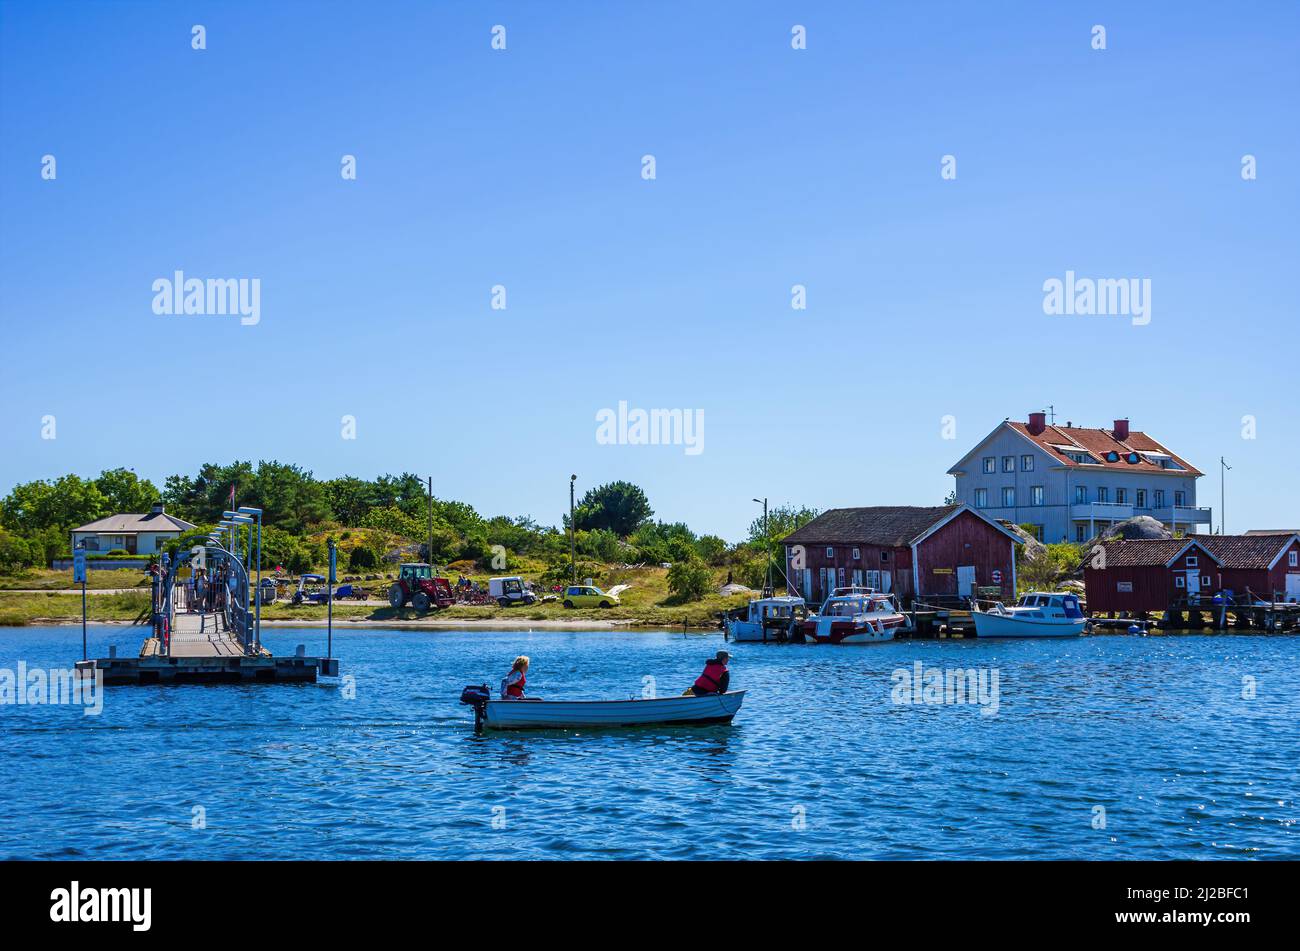 North Koster Island, Bohuslän, Västra Götalands län, Sweden: A motorized boat passes by while tourists wait at the ferry landing on South Koster. Stock Photo